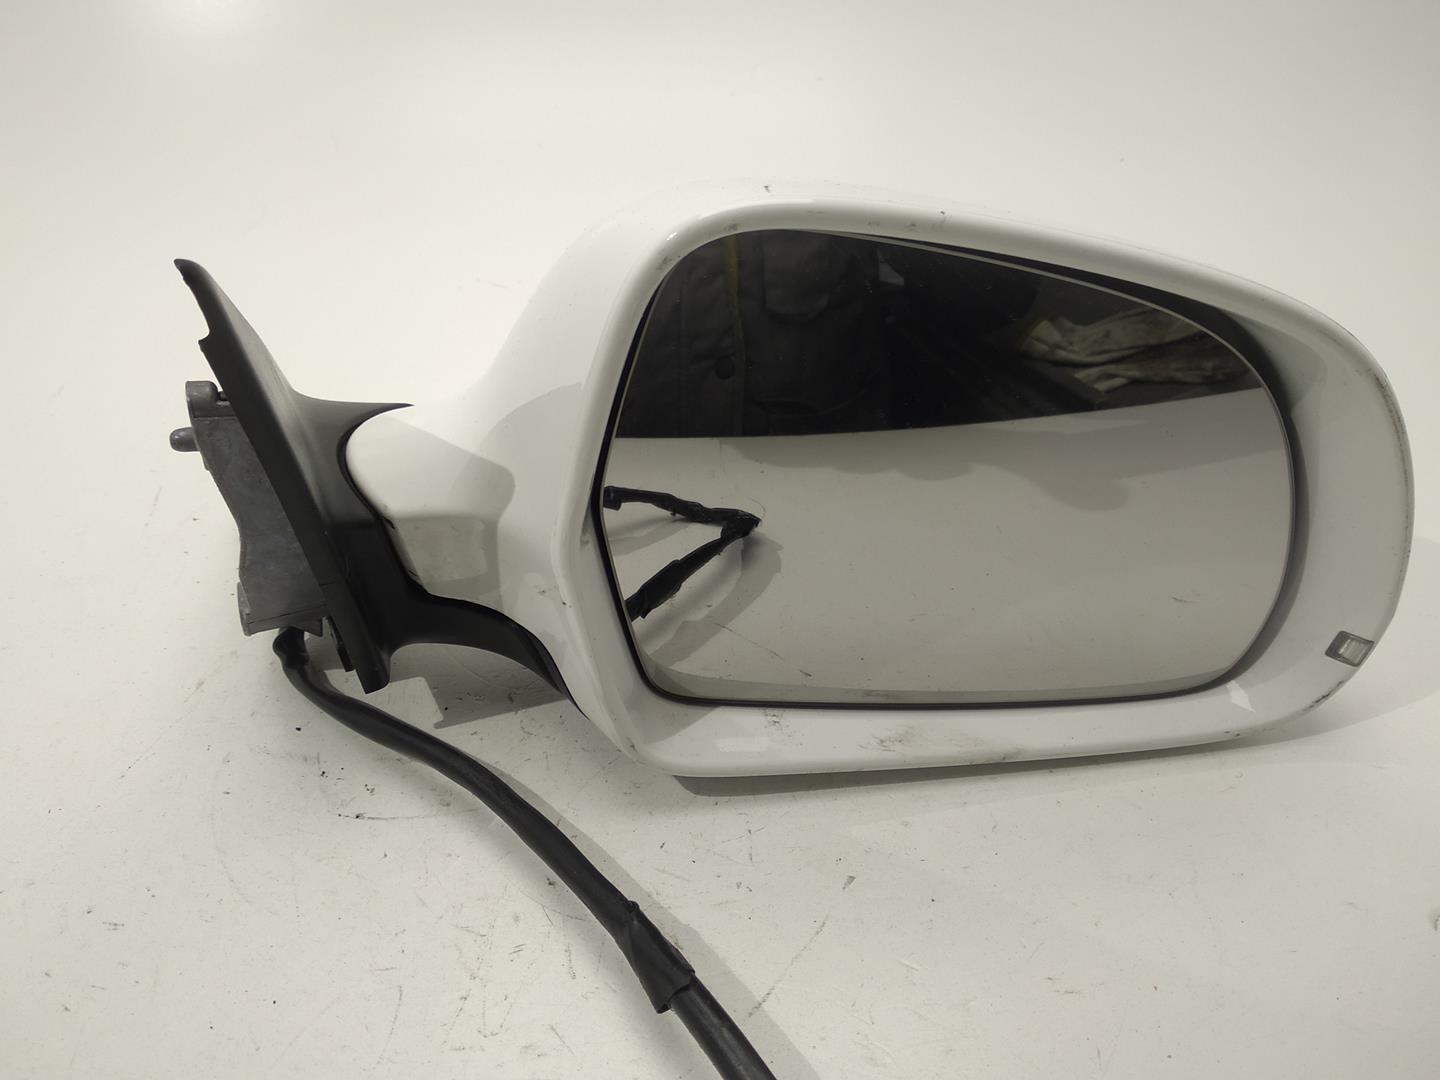 AUDI A6 C7/4G (2010-2020) Right Side Wing Mirror 4G1857410M, 4G1857410M, 4G1857410M 24512380